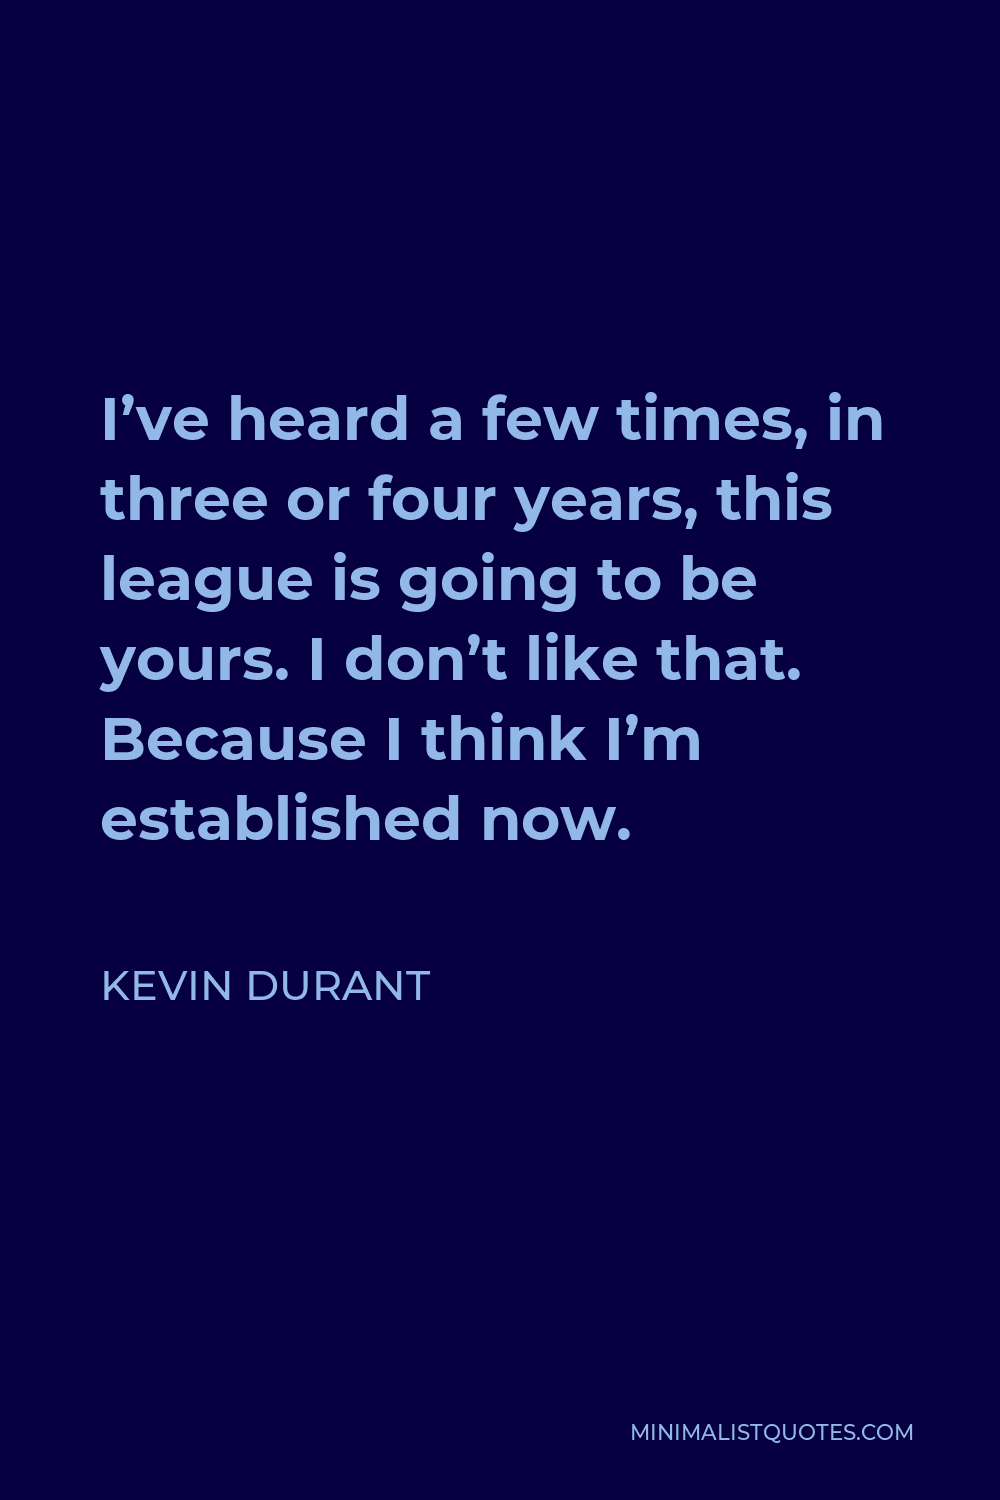 Kevin Durant Quote - I’ve heard a few times, in three or four years, this league is going to be yours. I don’t like that. Because I think I’m established now.